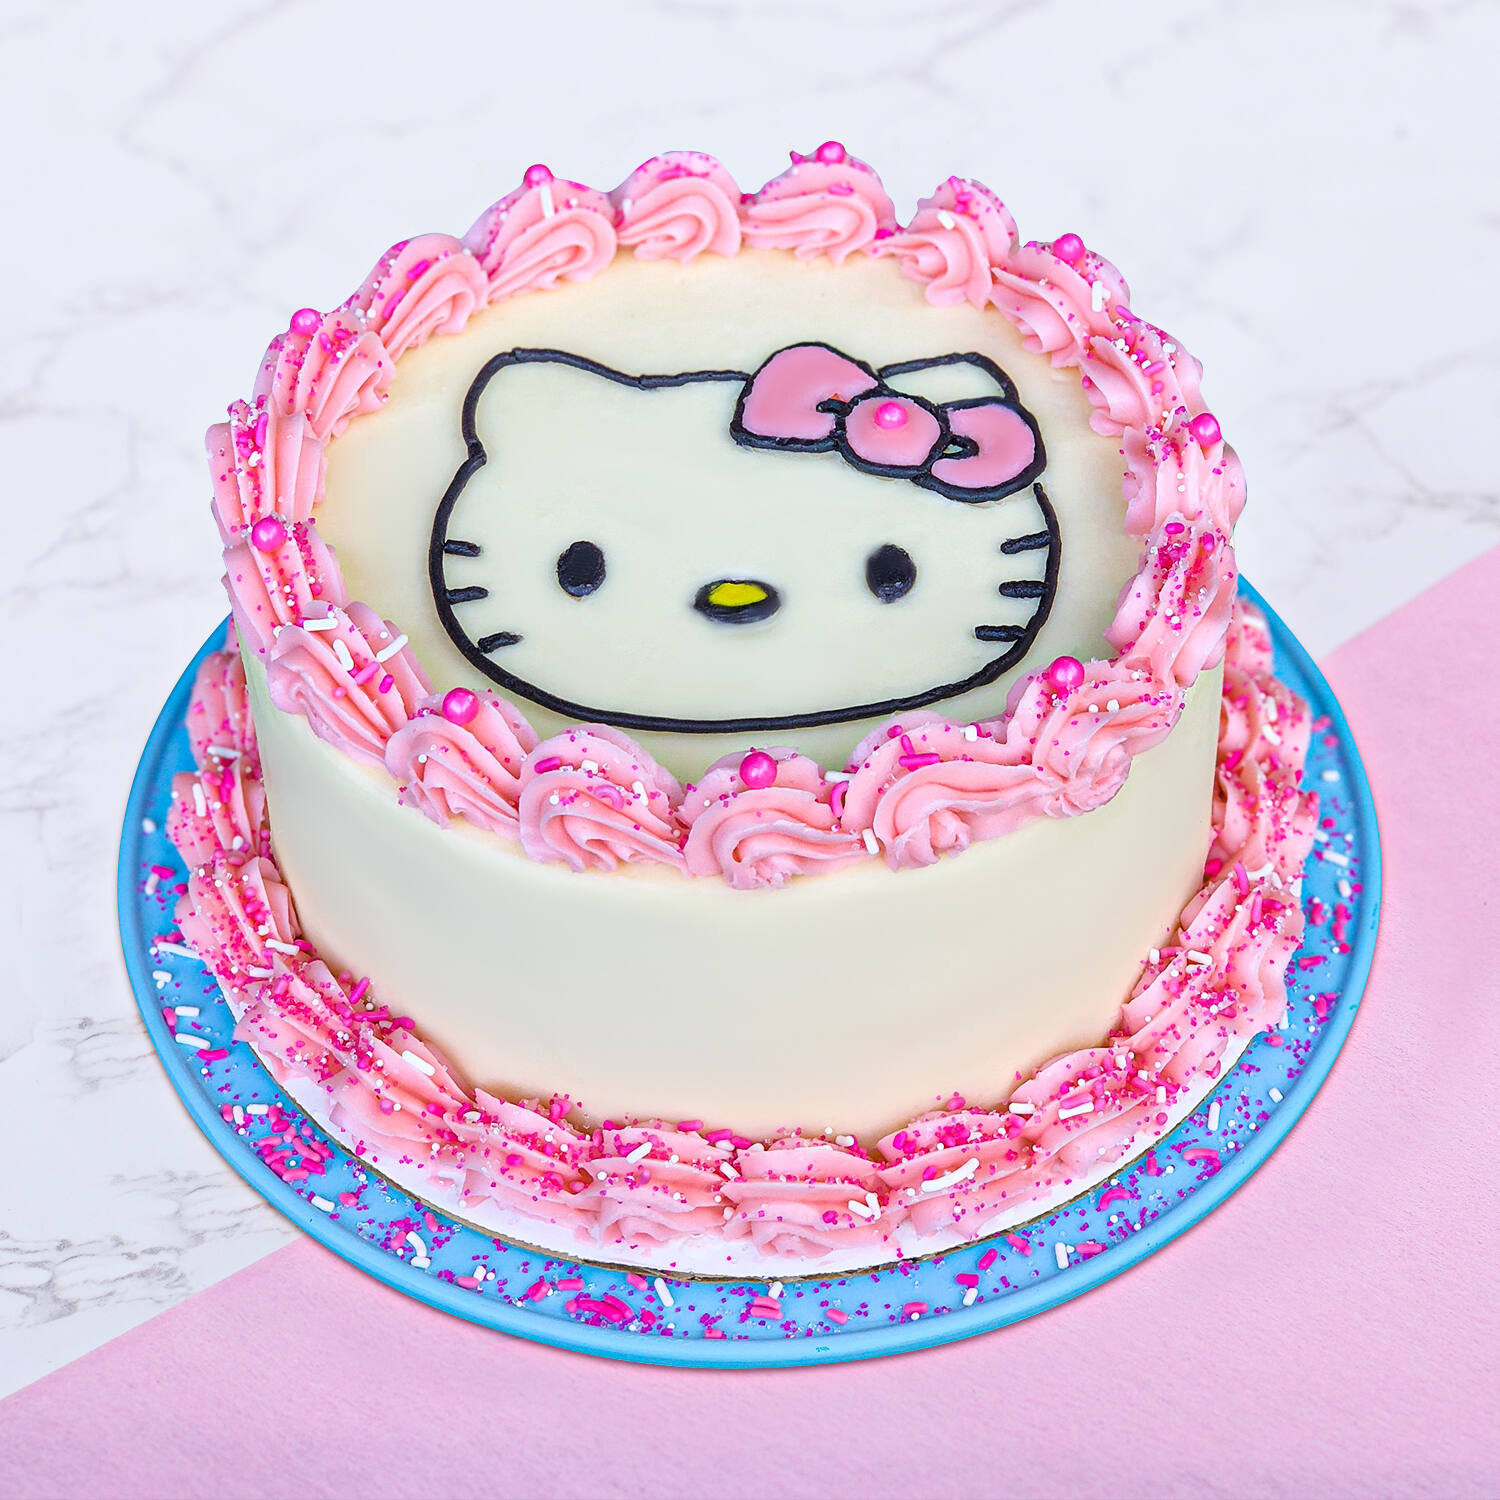 SIMPLE HELLO KITTY ROSETTE CAKE FOR TOUR BIRTHDAY EARLY GRIND 18   YouTube